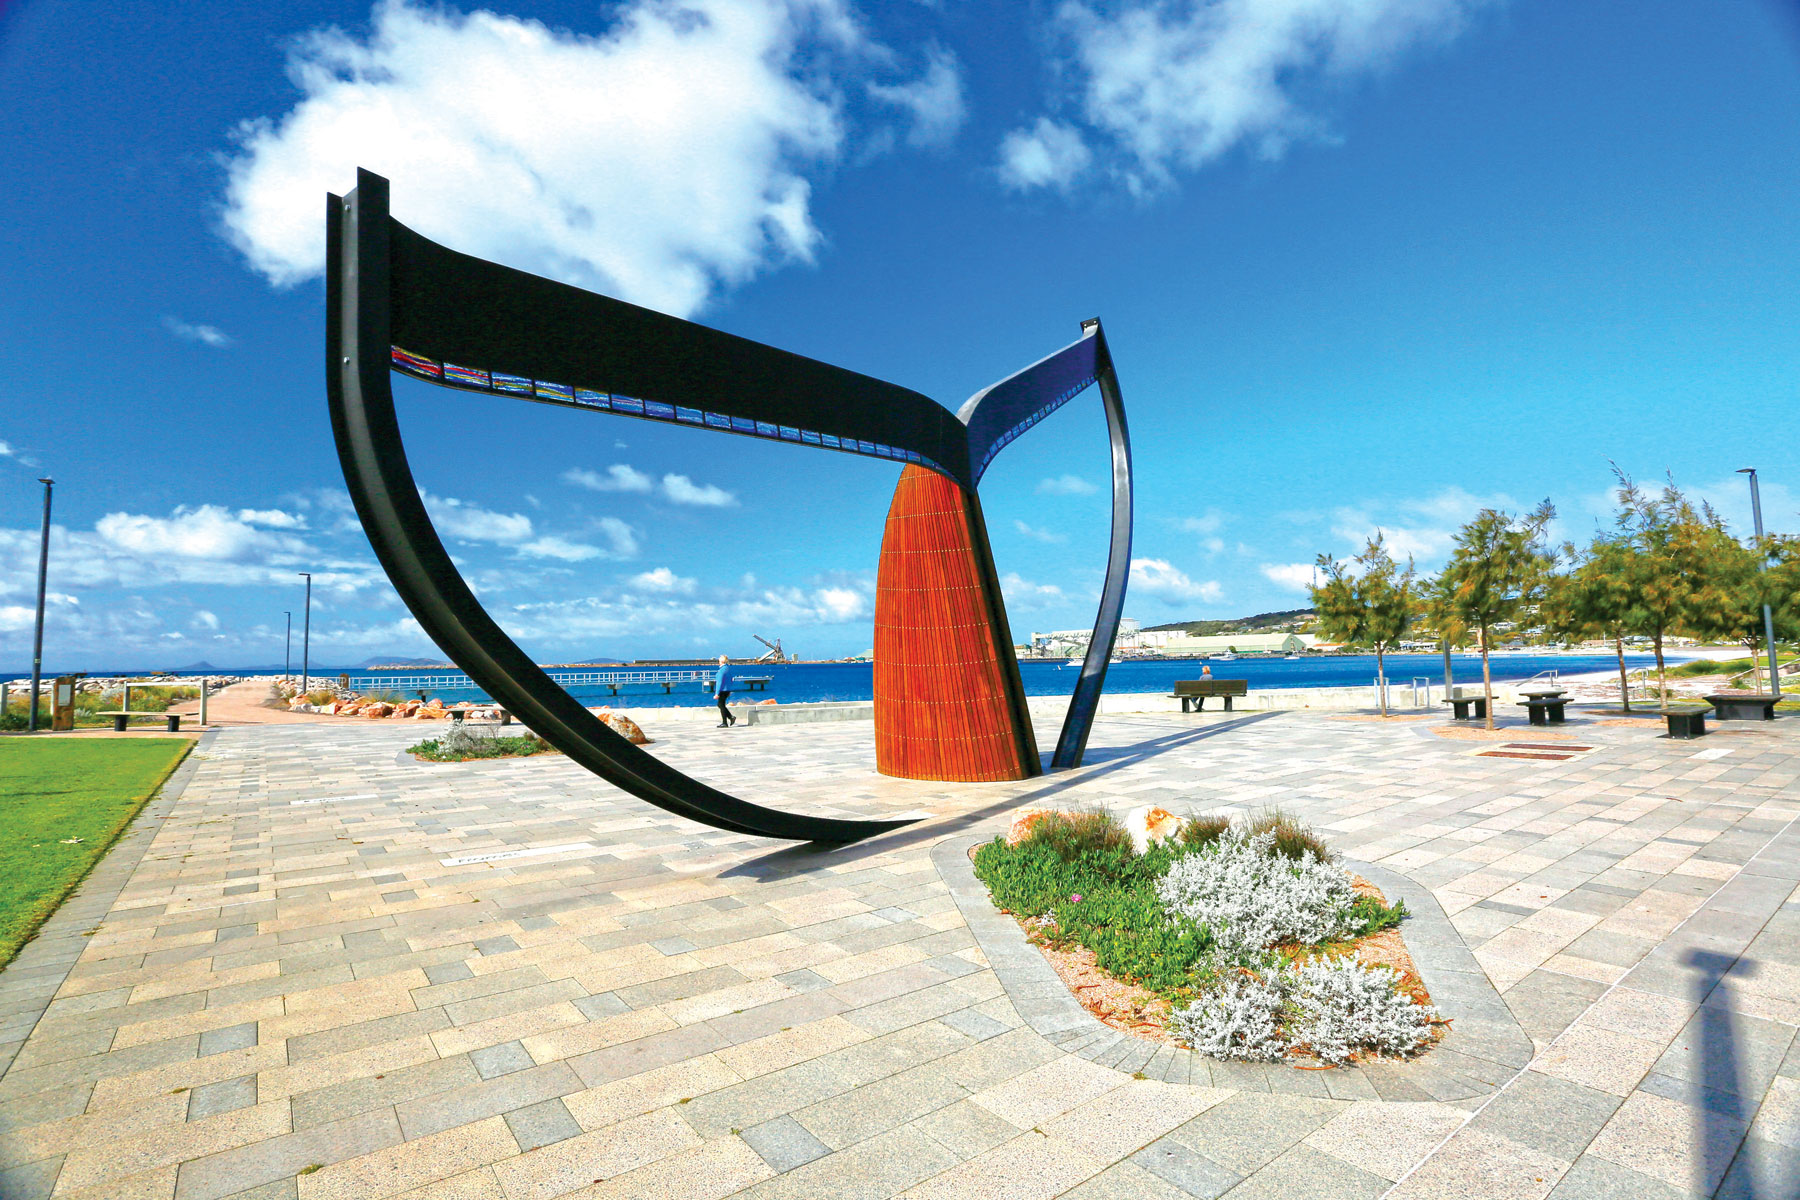 The Whale Tail sculpture on the Esplanade at Esperance